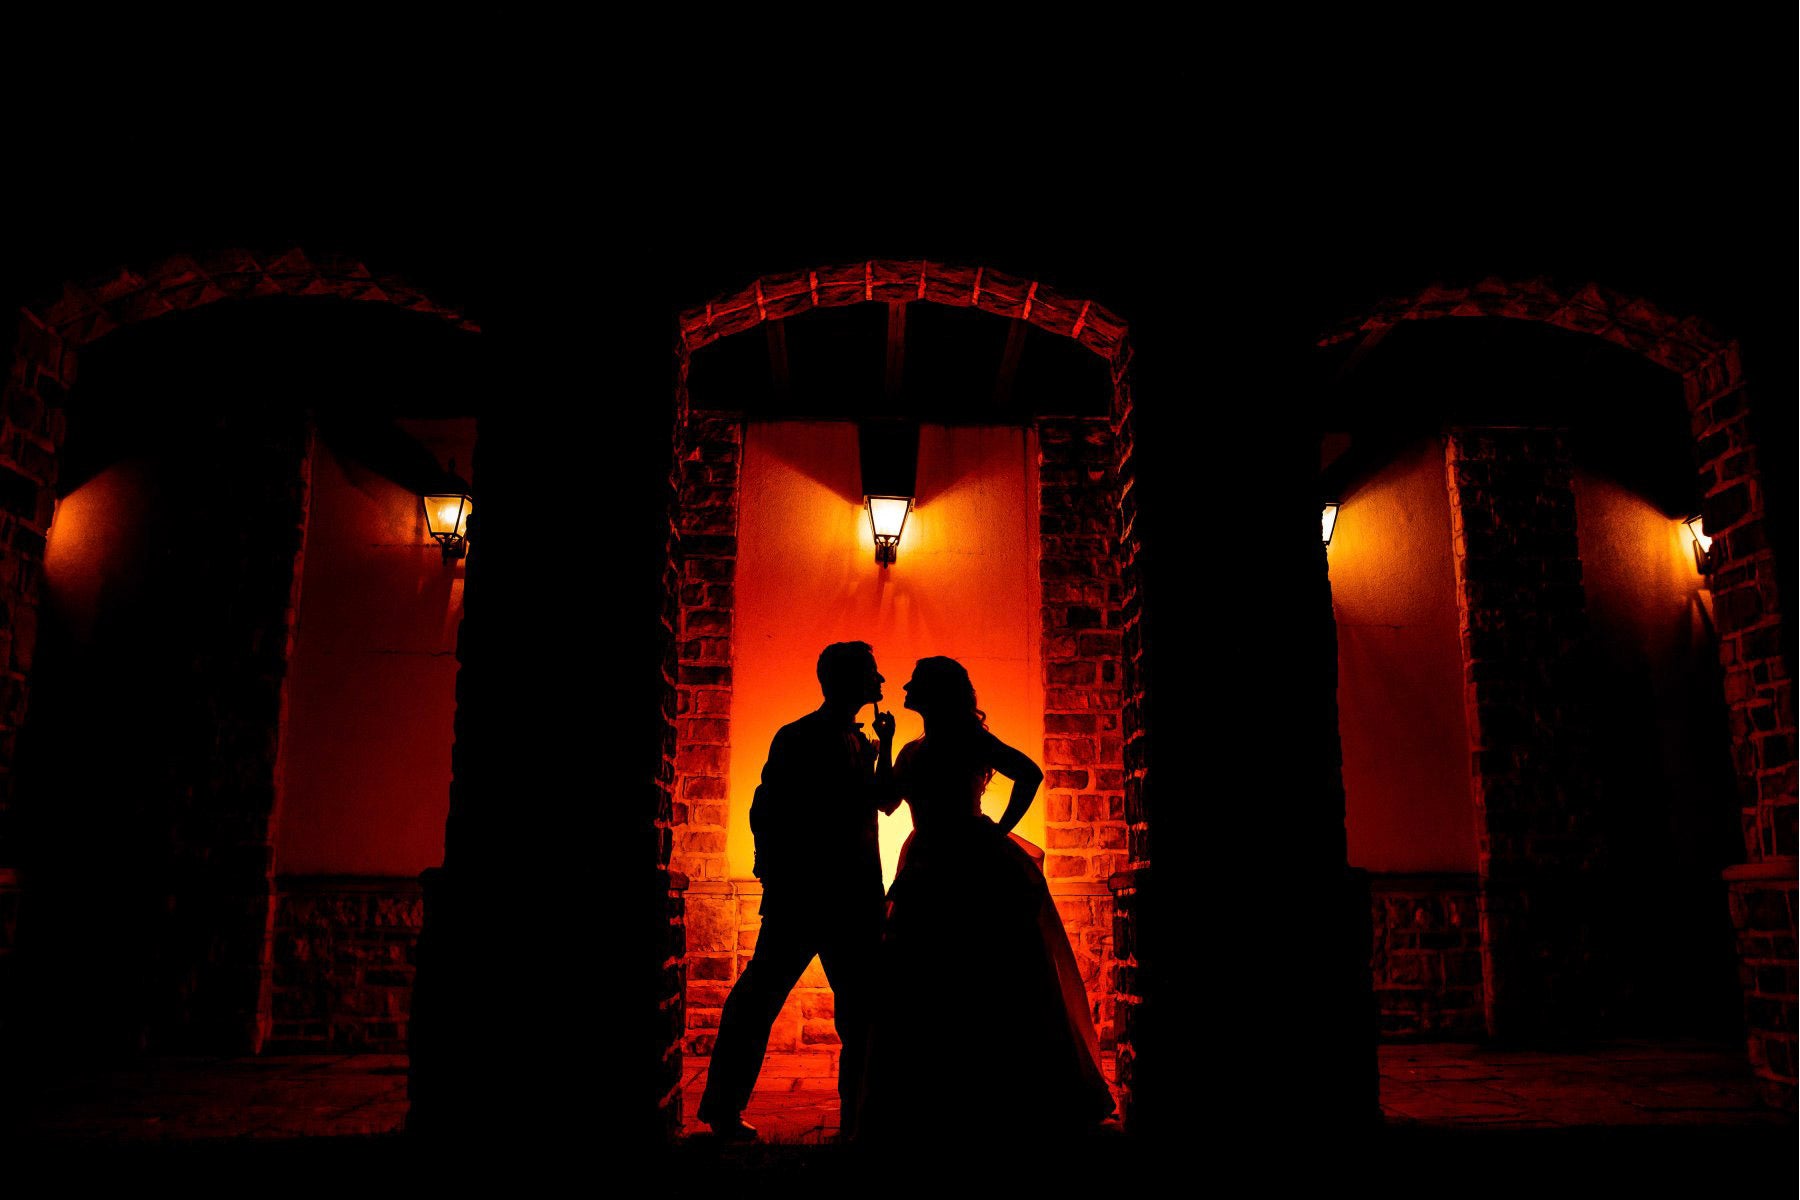 a silhouette of a couple standing together posing in a lowlight setting